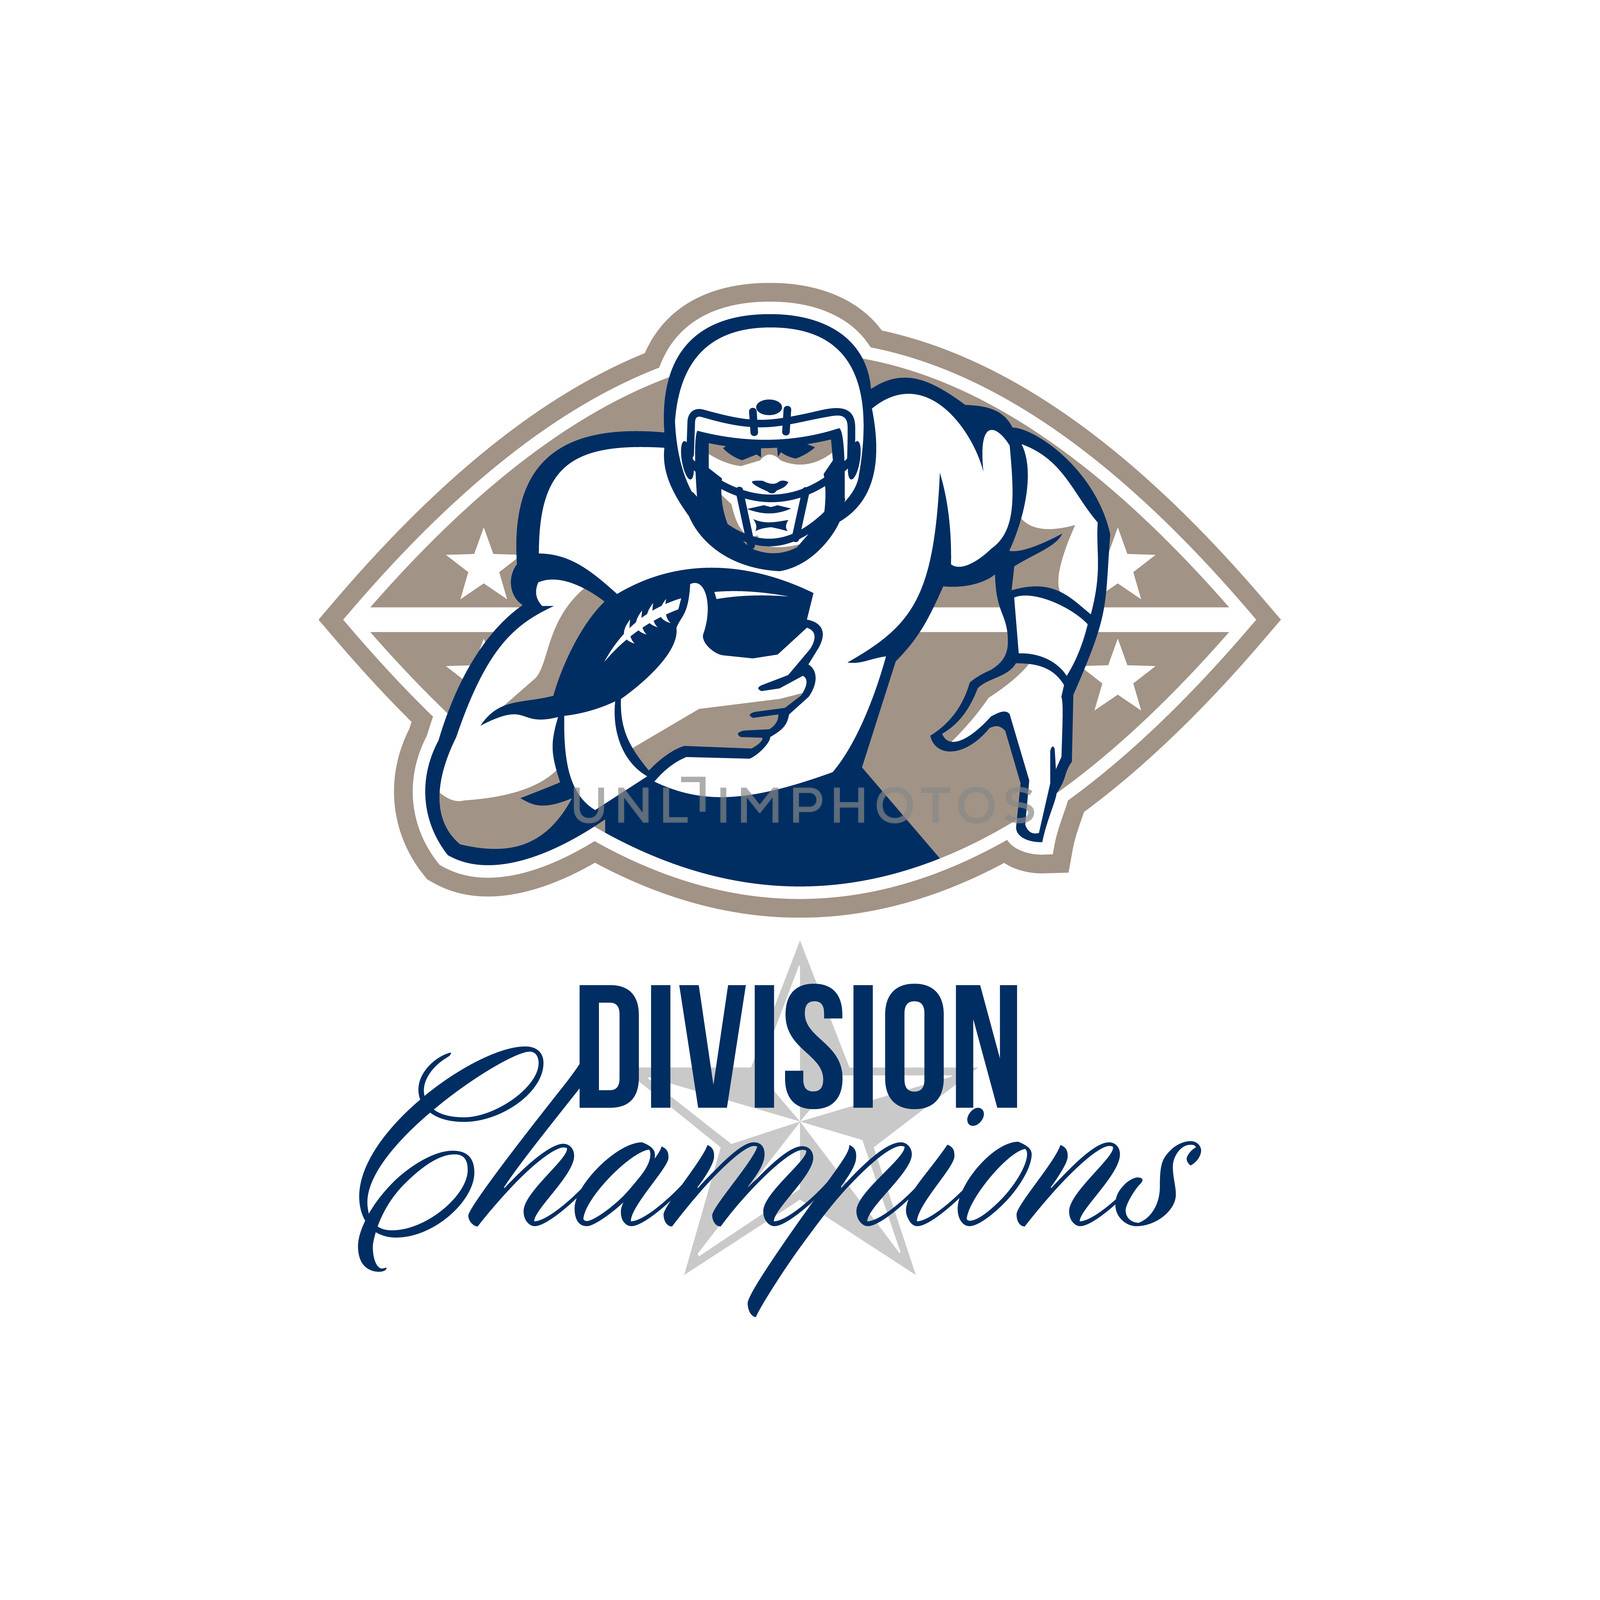 Illustration of an american football gridiron runningback player running with ball facing front done in retro style wiht words Division Champions.